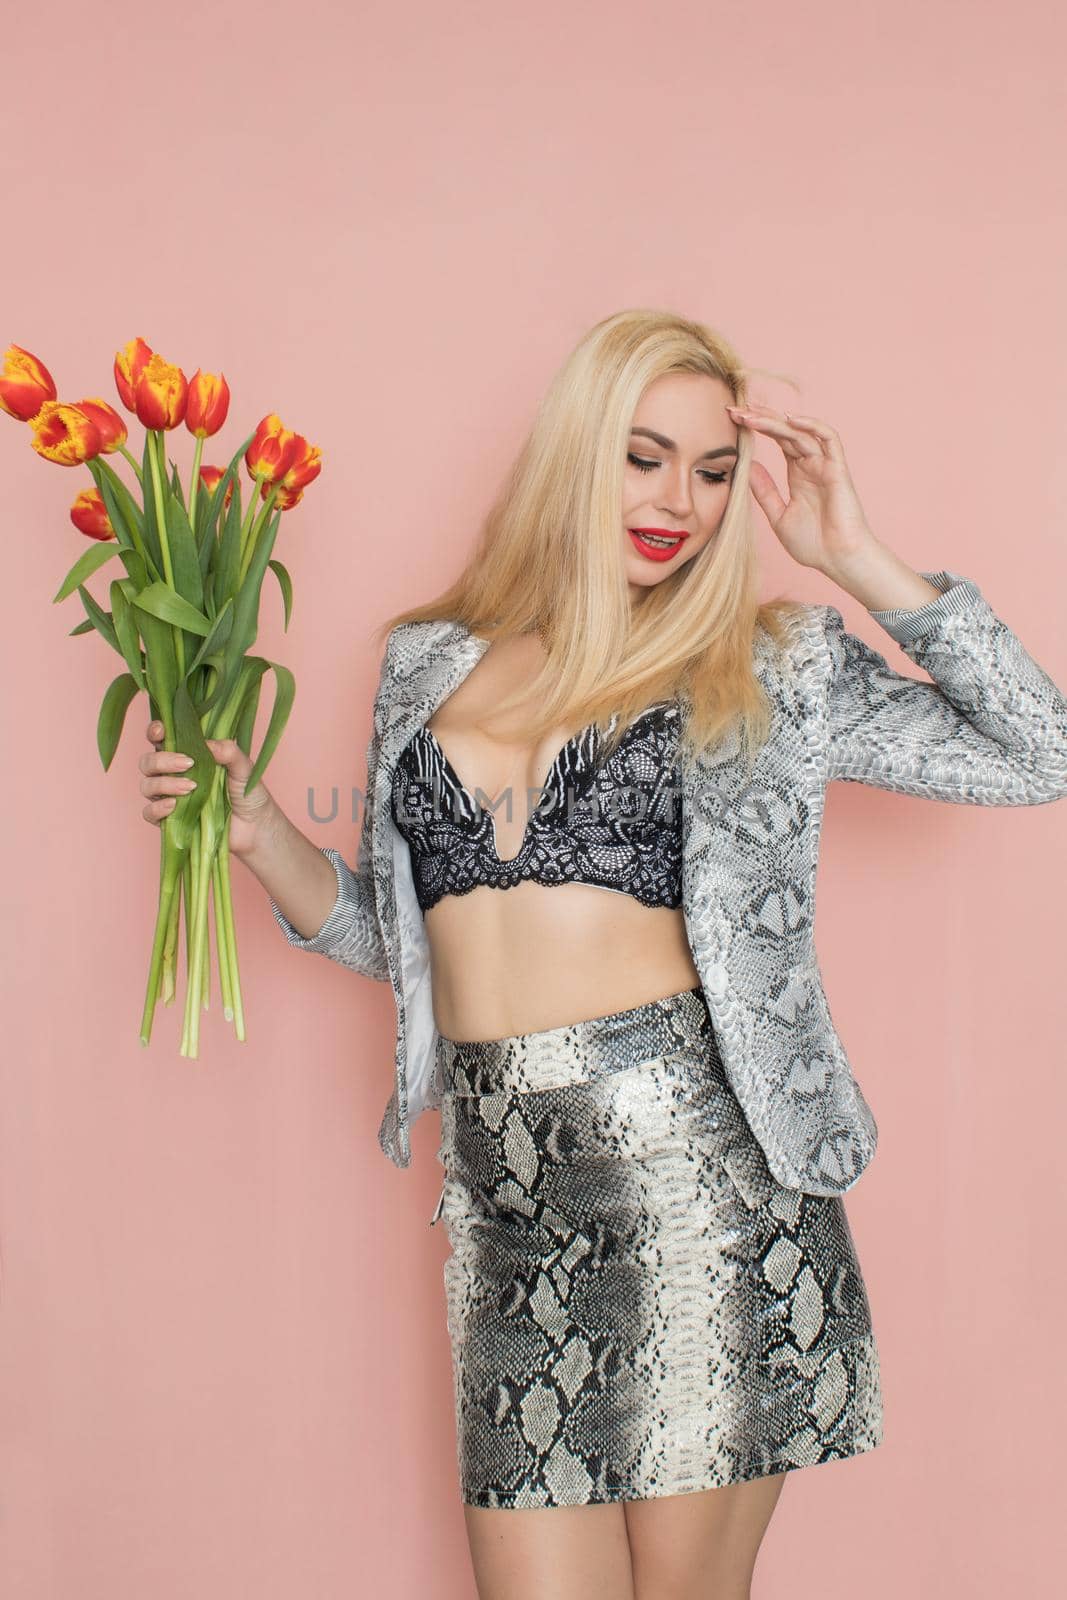 Fashion photo of a beautiful elegant young woman in pretty snake suit, jacket blazer, top, skirt, massive chain around the neck posing on pink background. Studio shot. Bouquet orange tulips holding in hands.